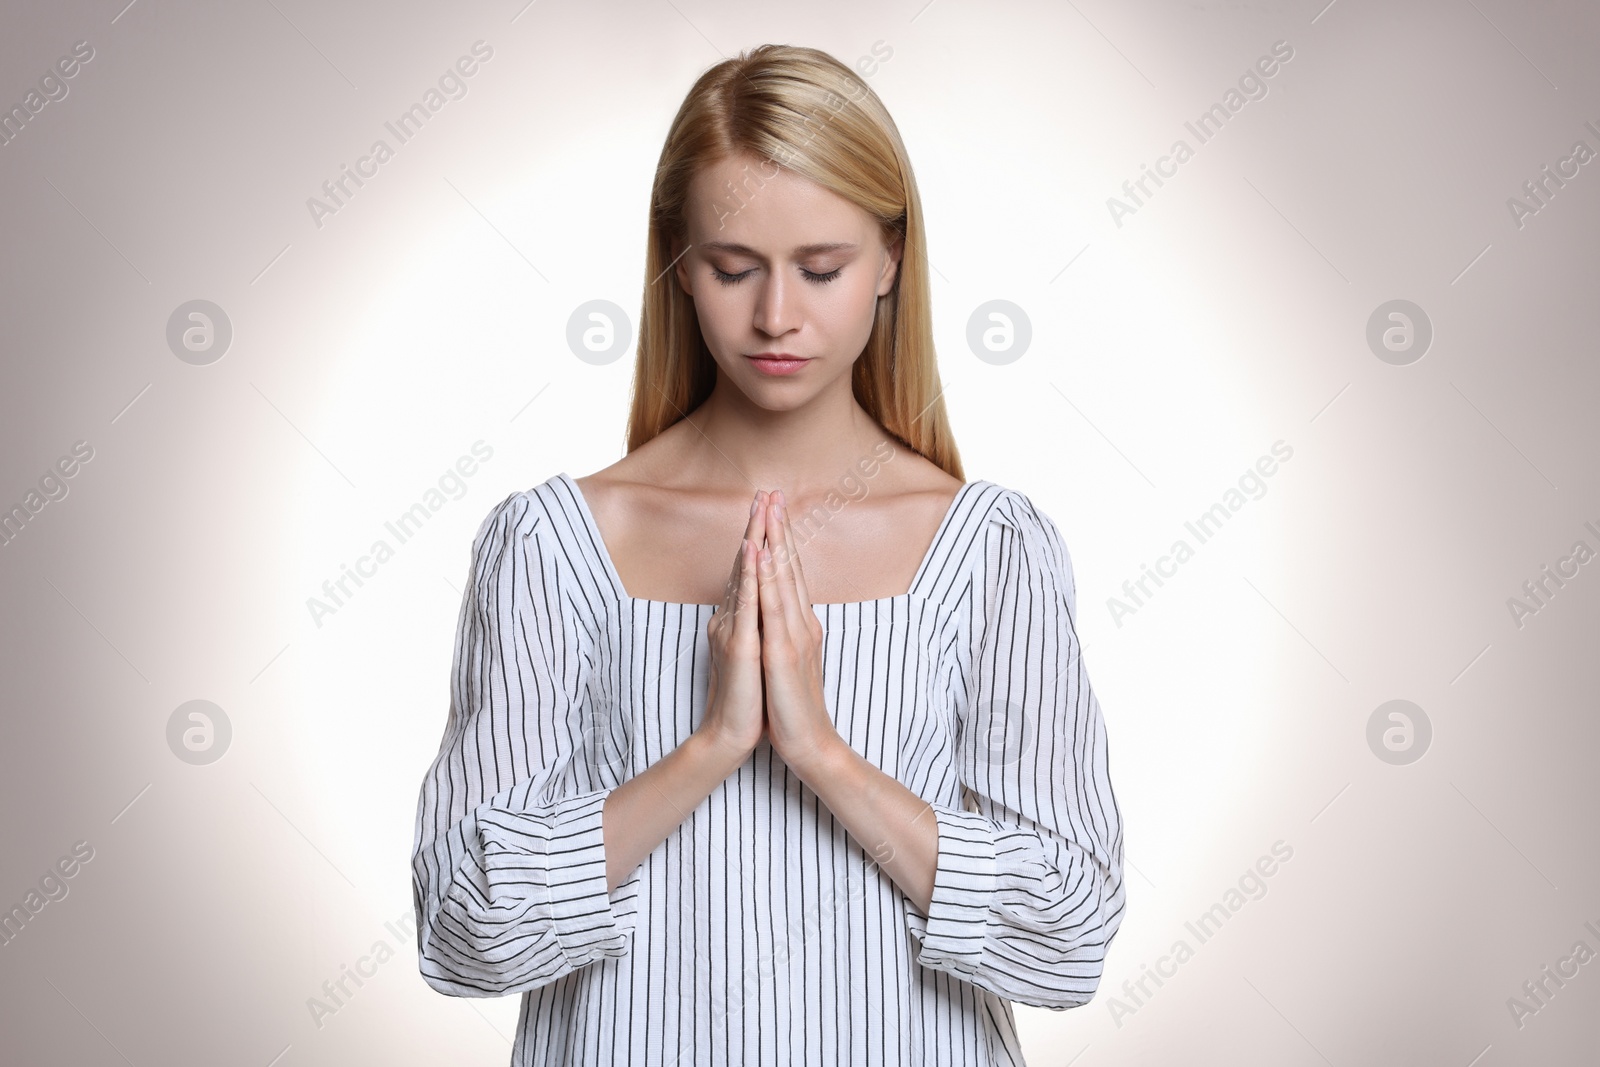 Photo of Religious young woman with clasped hands praying against light background